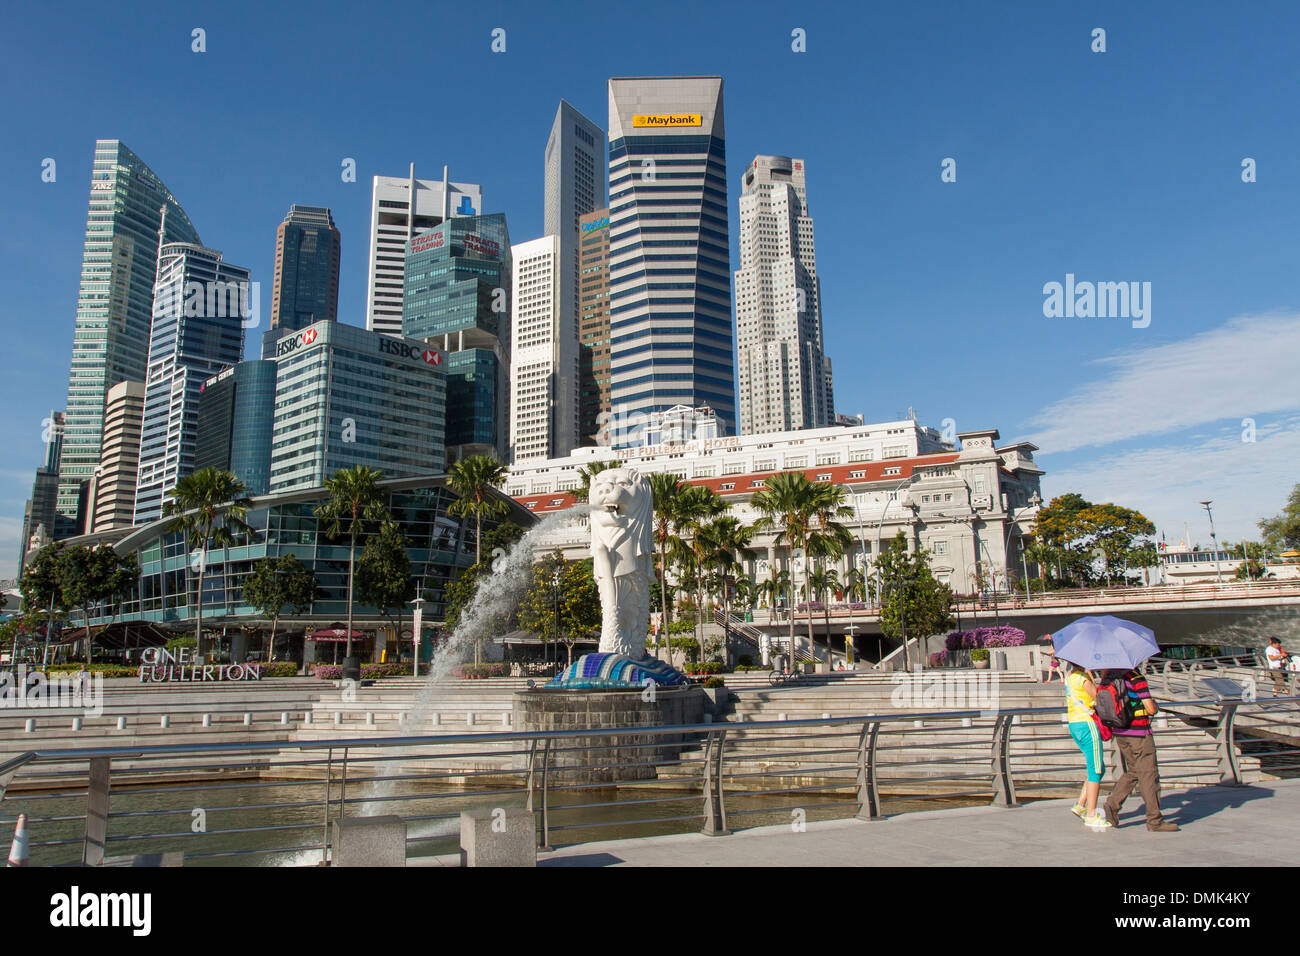 TOURISTS LOOKING AT THE SCULPTURE MERLION, SYMBOLISING SINGAPORE, AT THE FOOT OF THE OFFICE BUILDINGS IN THE FINANCIAL DISTRICT, CENTRAL BUSINESS DISTRICT, SINGAPORE Stock Photo